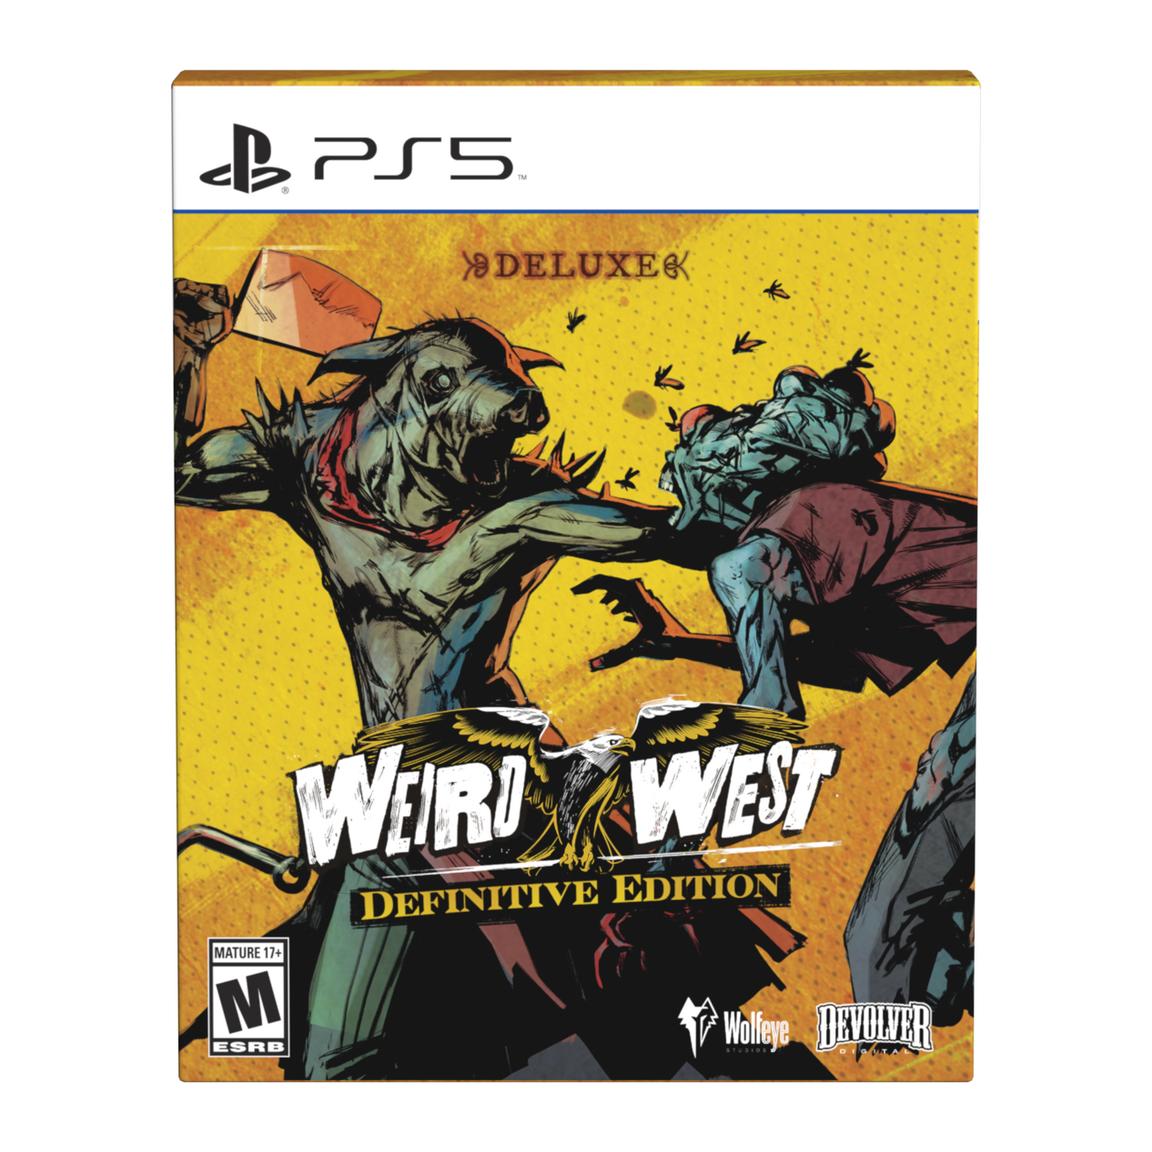 Видеоигра Weird West: Definitive Edition Deluxe - PlayStation 5 xbox игра bethesda dishonored 2 limited edition